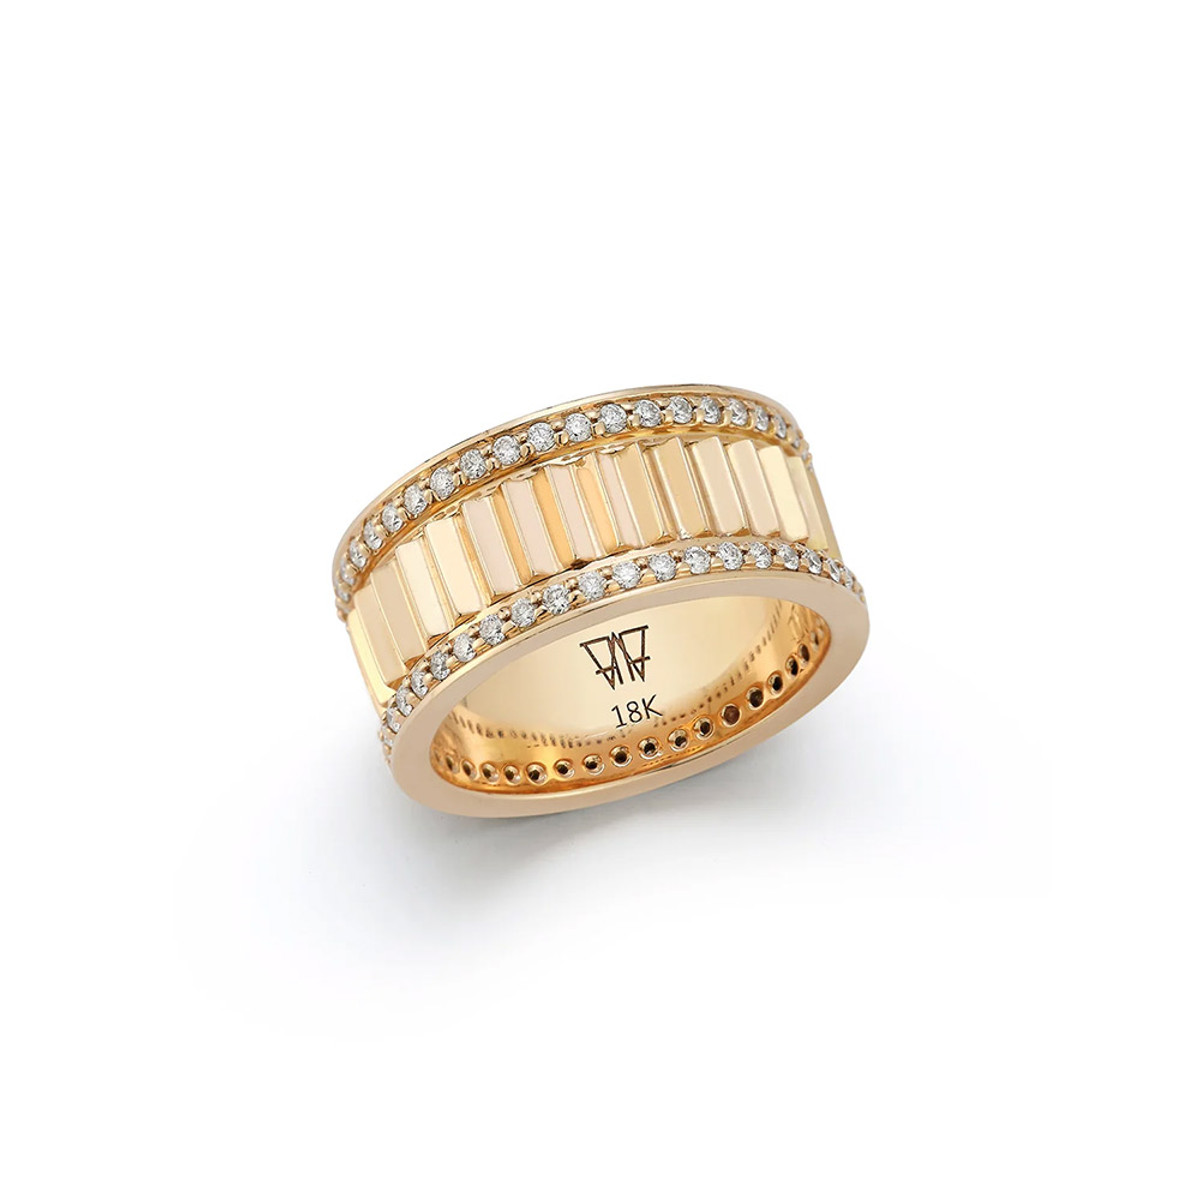 Walters Faith Clive 18K Rose Gold and Diamond Fluted Band Ring, Size 7-58921 Product Image